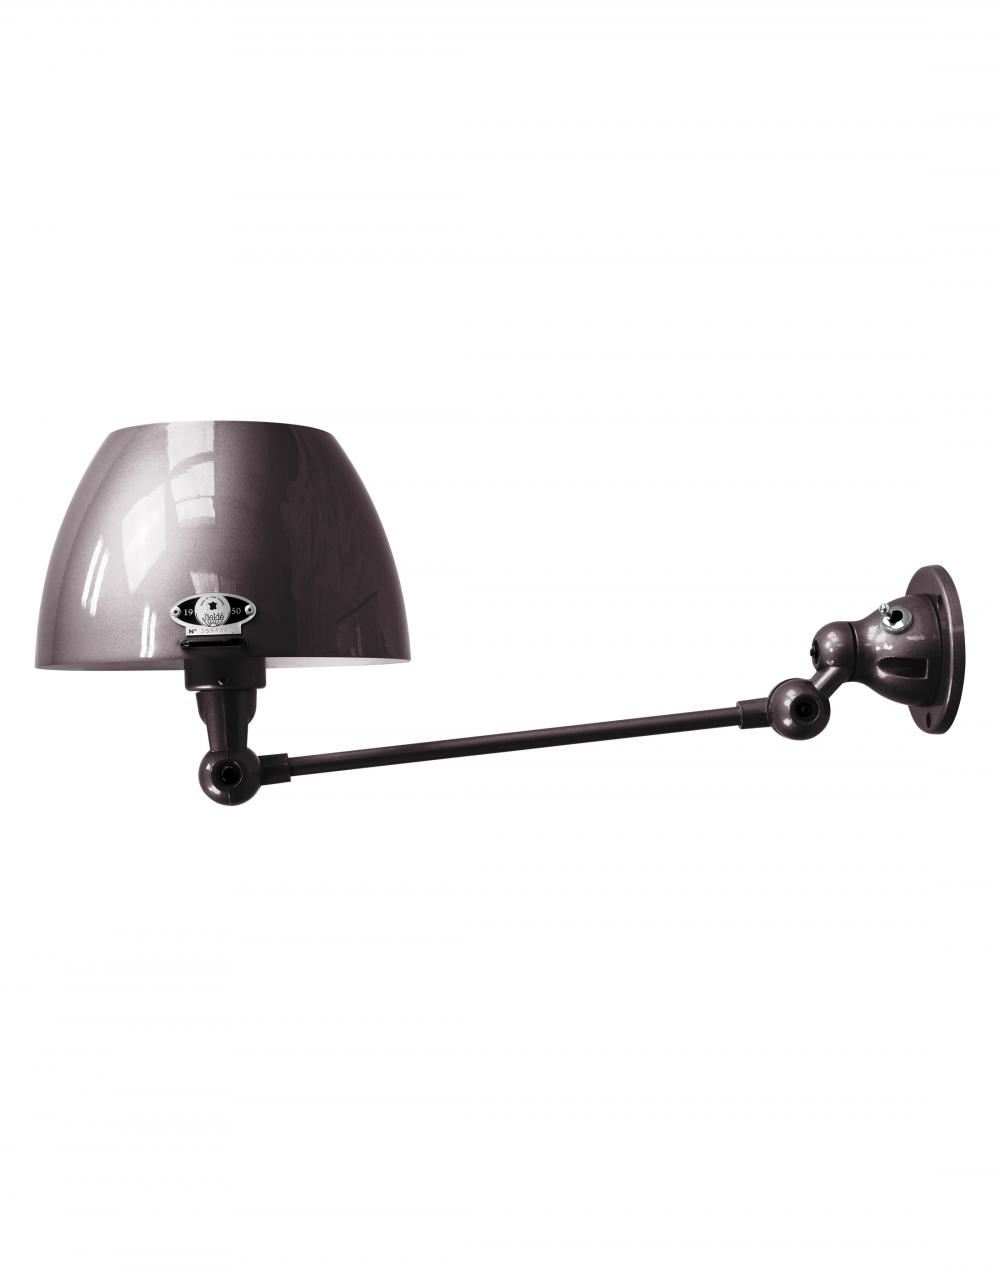 Jielde Aicler One Arm Adjustable Wall Light Curved Shade Black Gloss Integral Switch On Base